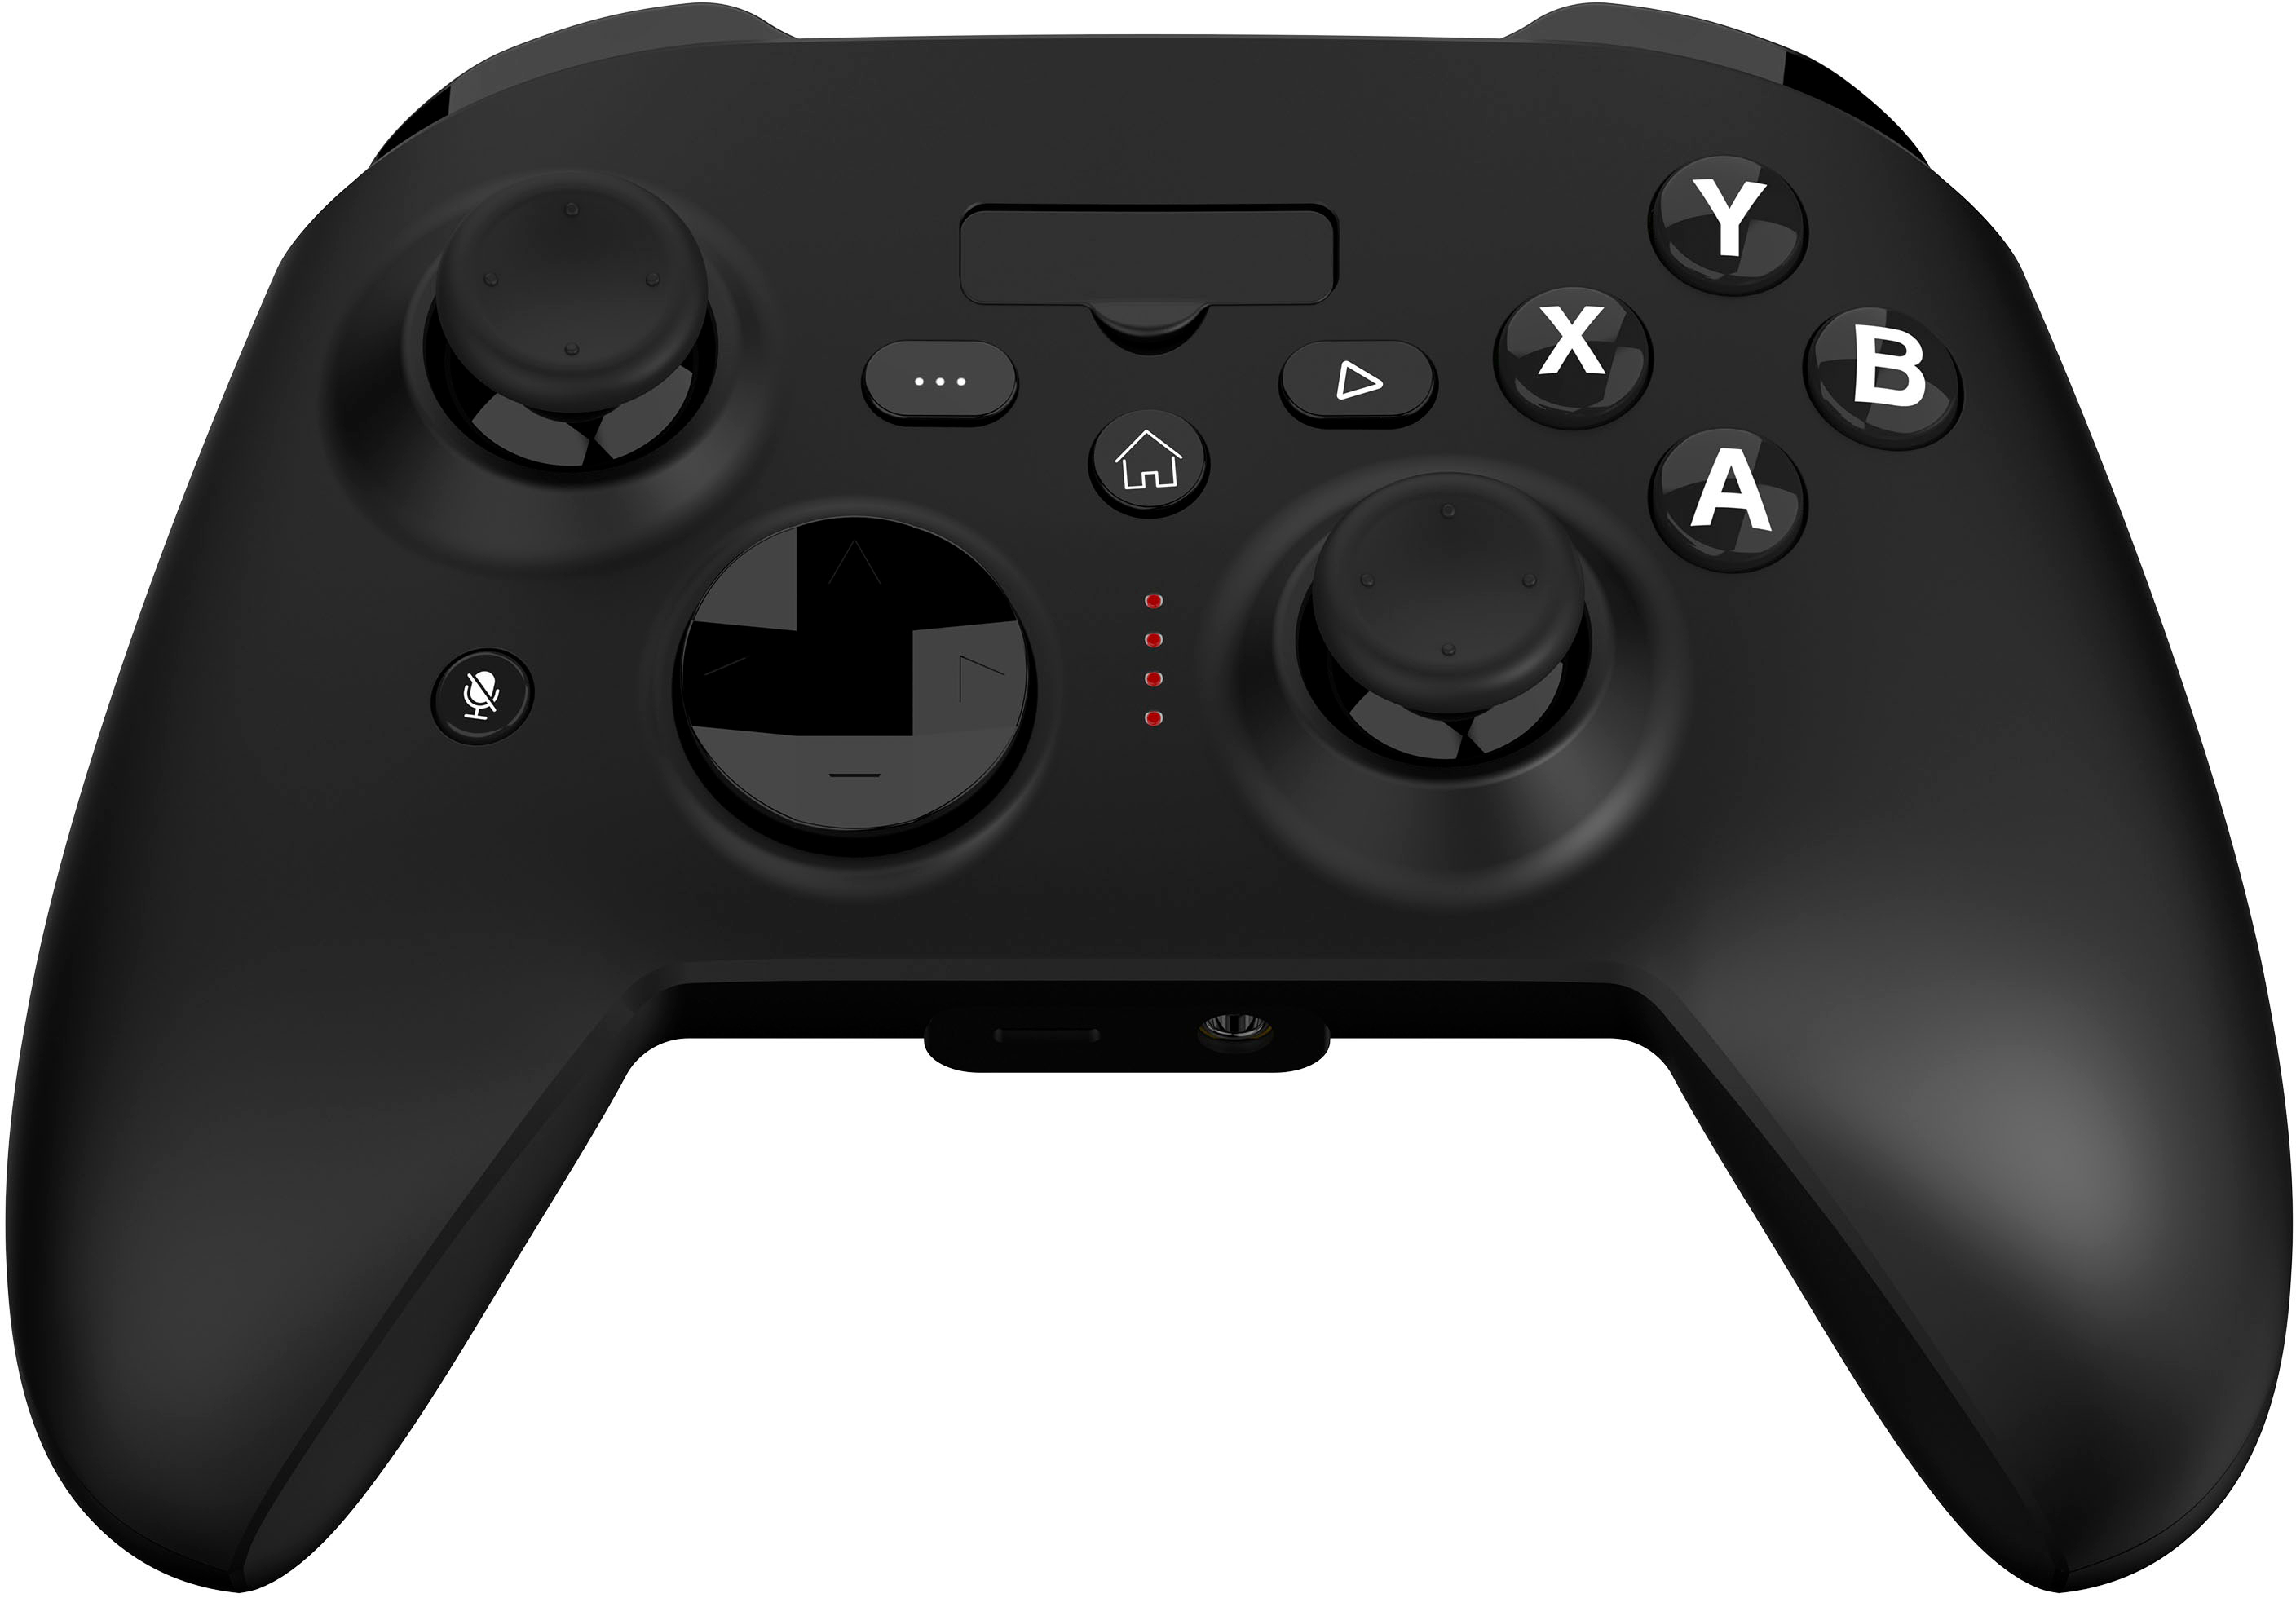  RiotPWR Mobile Cloud Gaming Controller for iOS